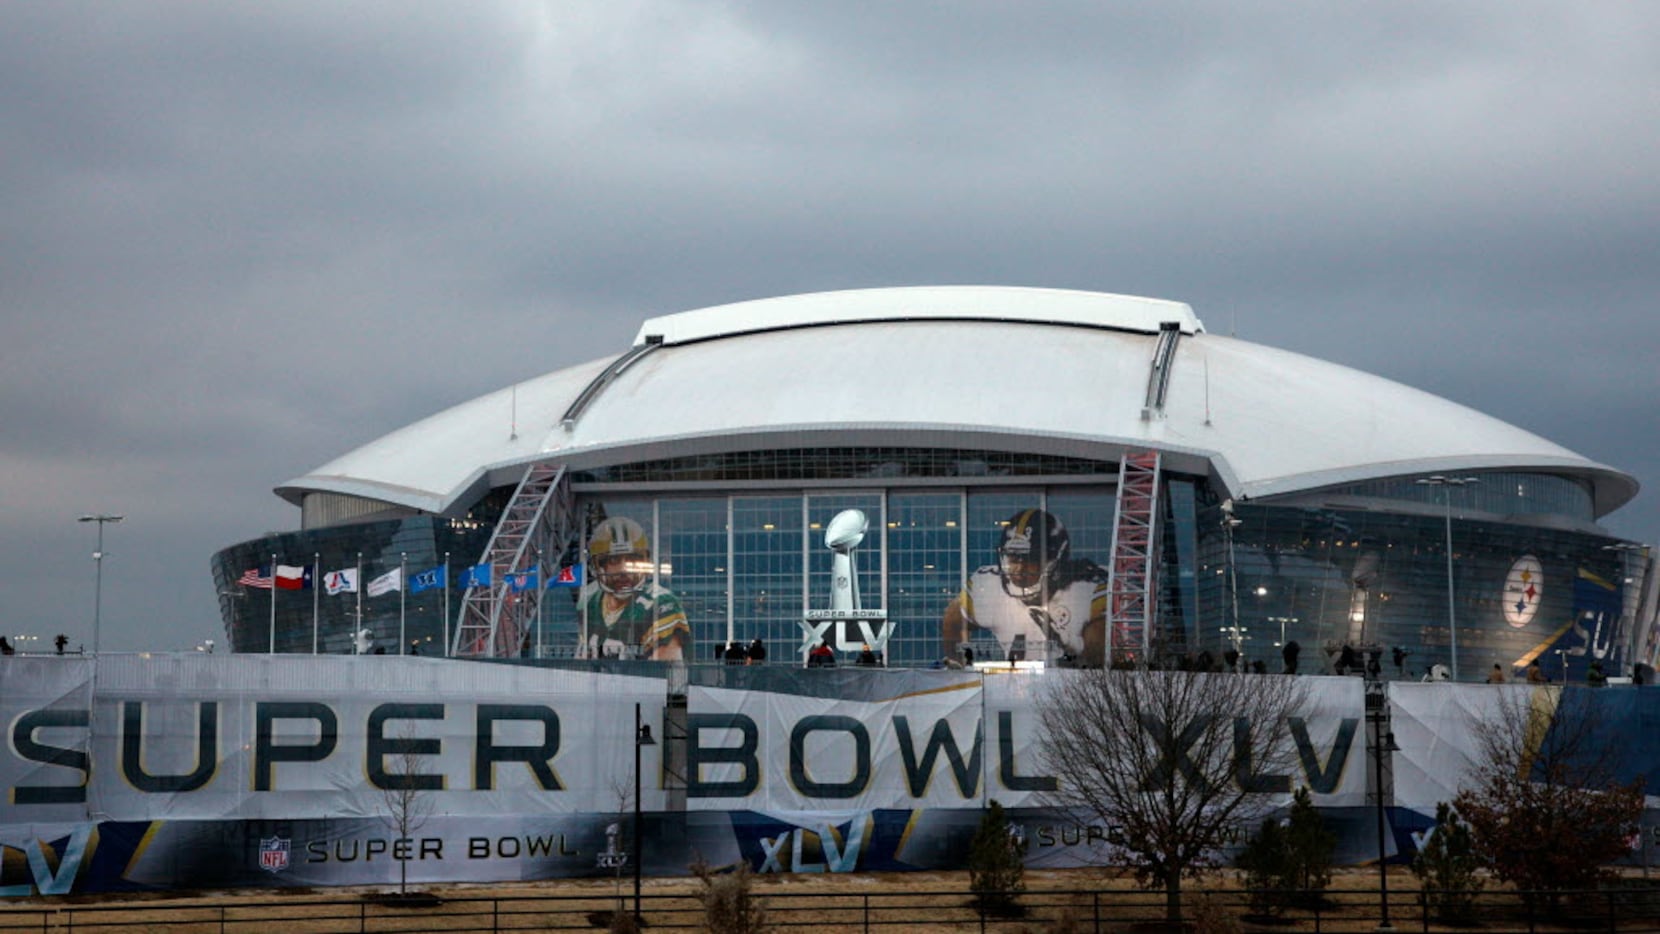 Cowboys' stadium officially out of running to host Super Bowl